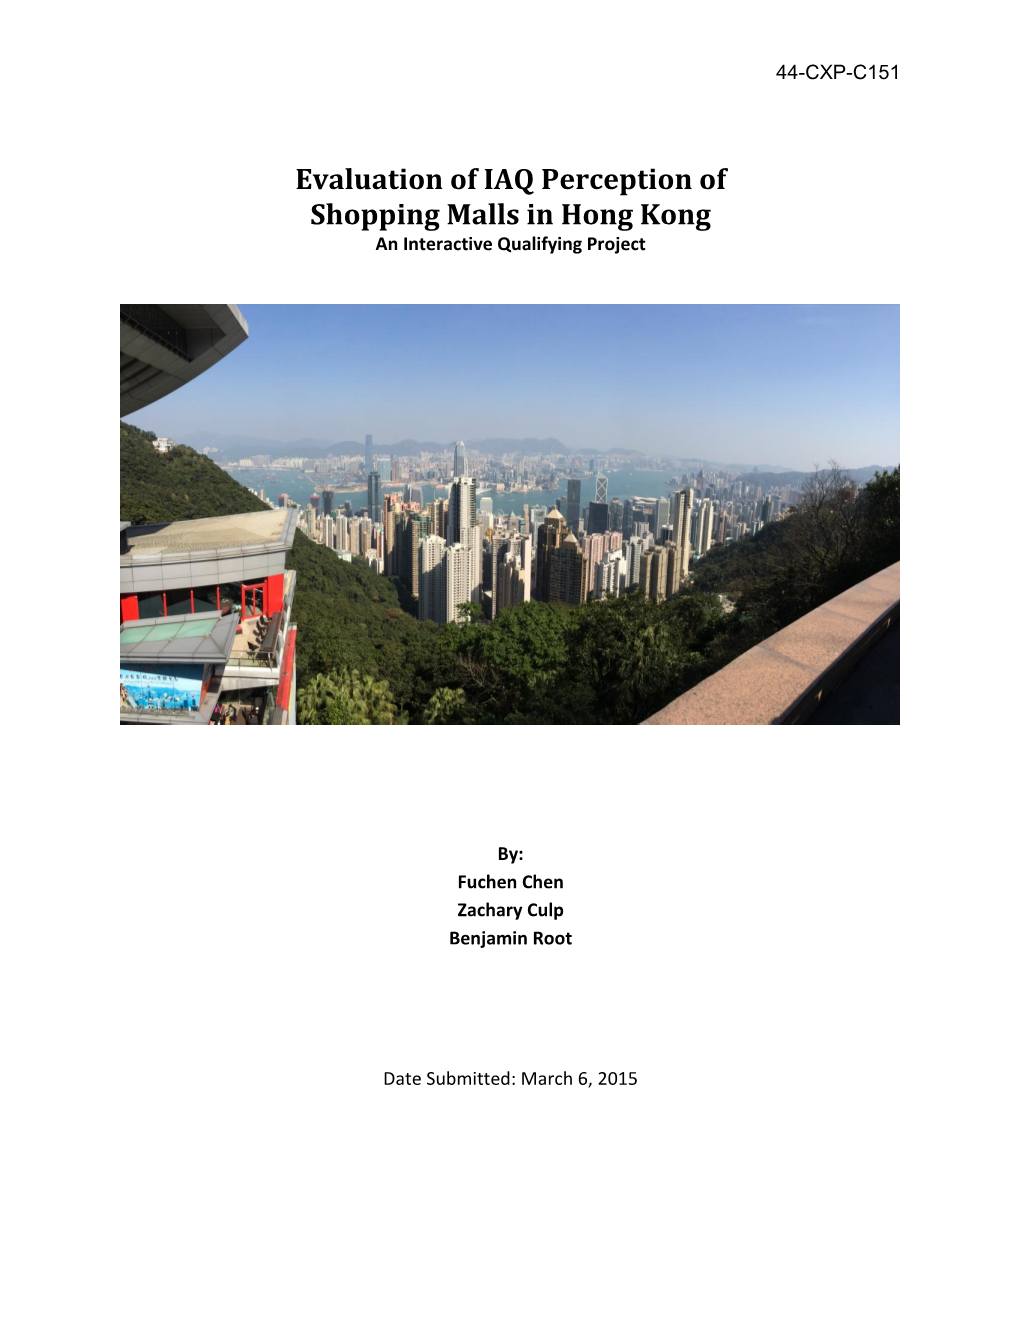 Evaluation of IAQ Perception of Shopping Malls in Hong Kong an Interactive Qualifying Project